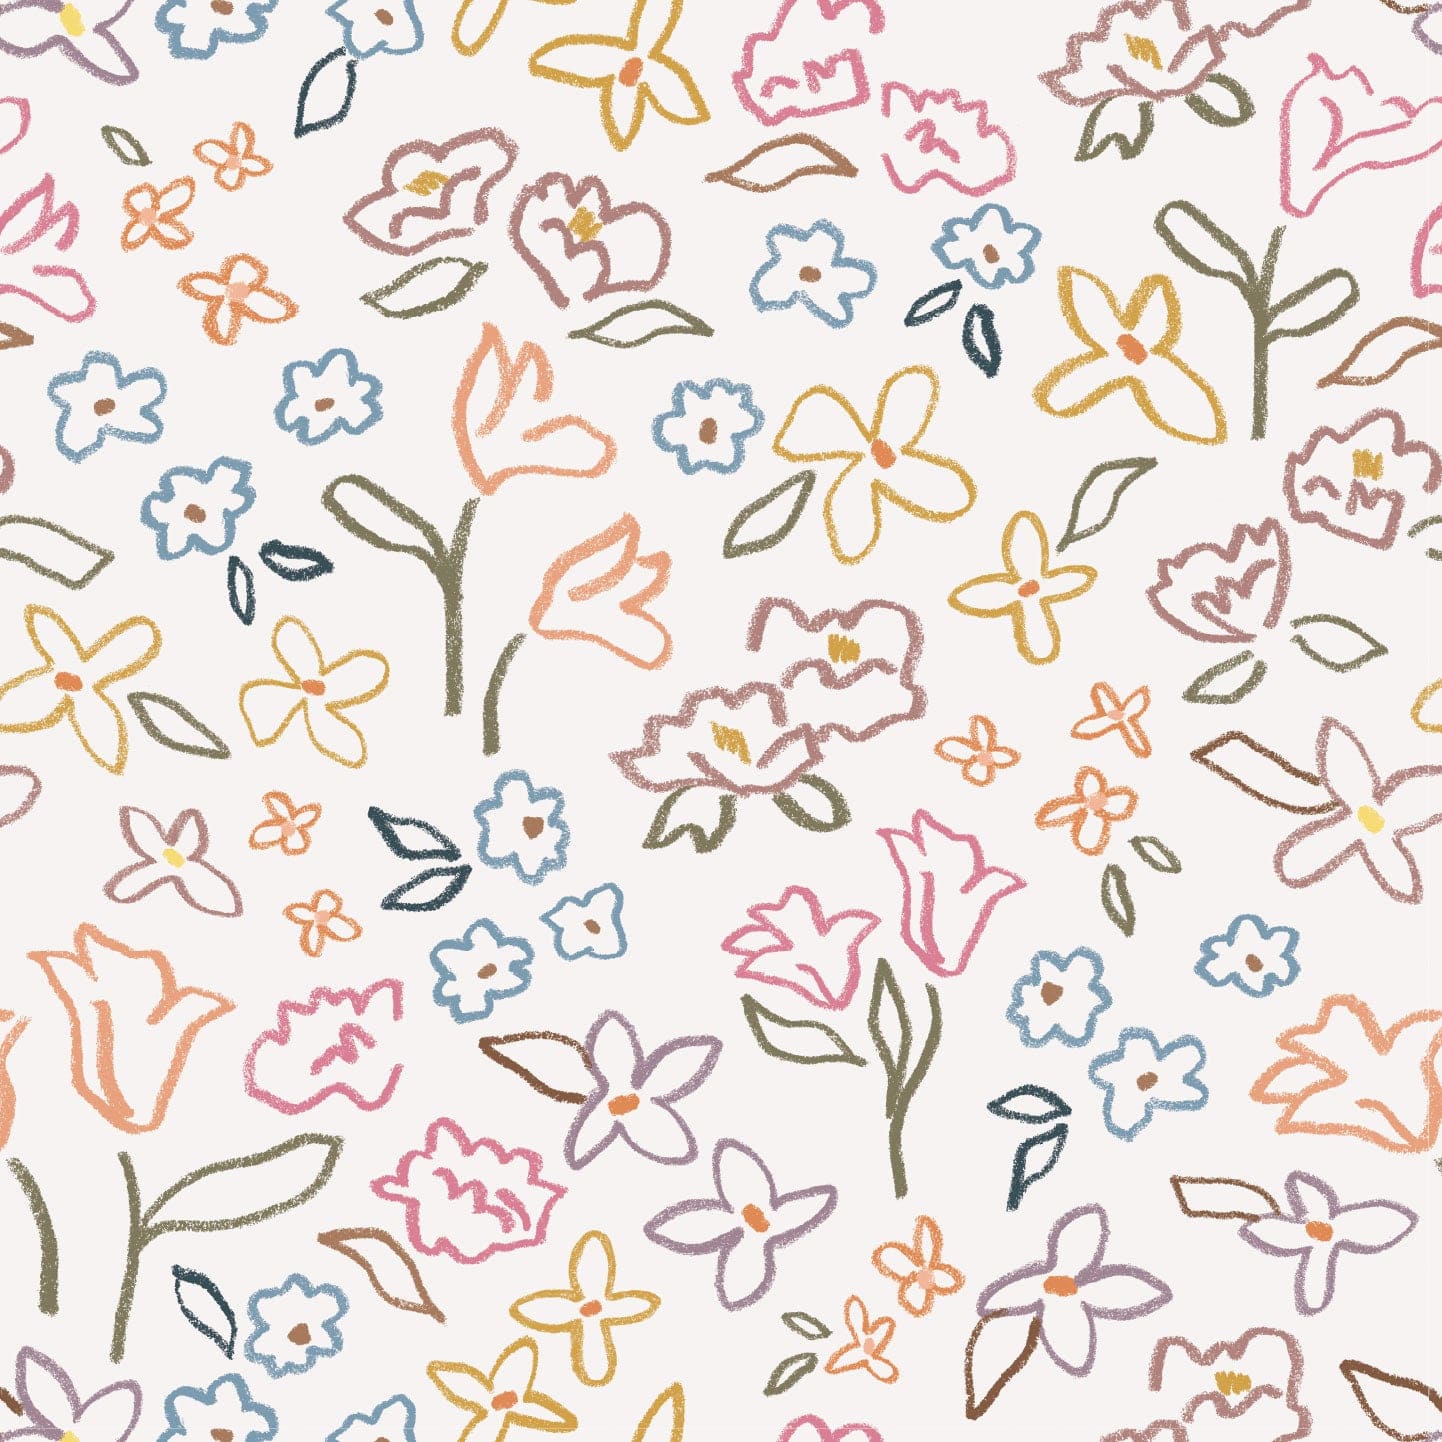 Wallpaper sample of flowers in coral, green, yellow, blue and pink in a crayon drawn style.